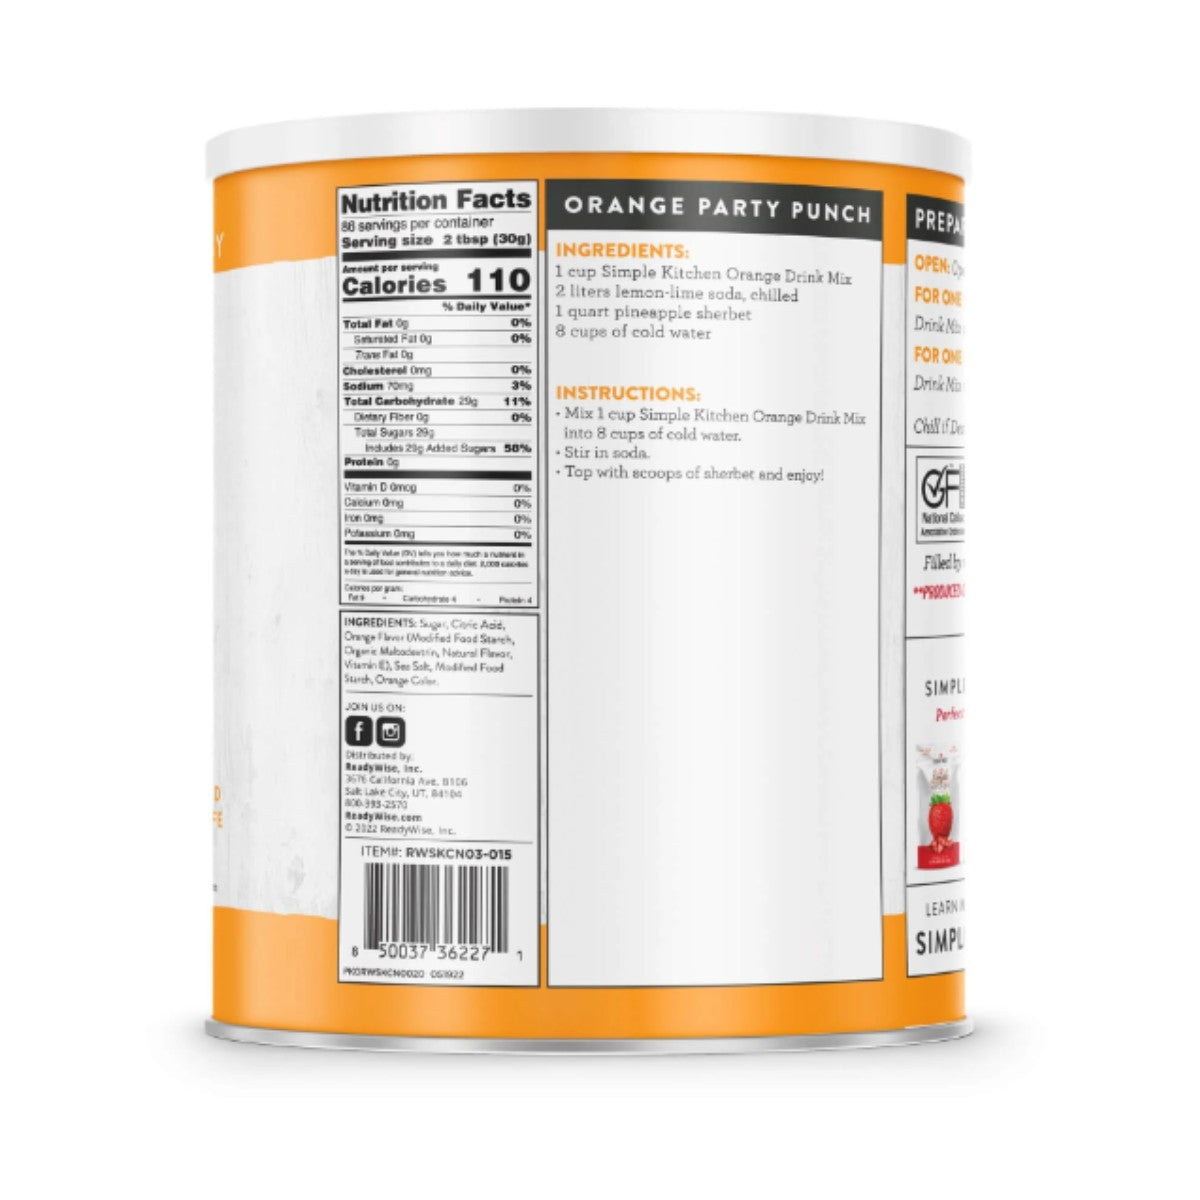 ReadyWise Simple Kitchen Orange Drink Mix 86 Serving Can